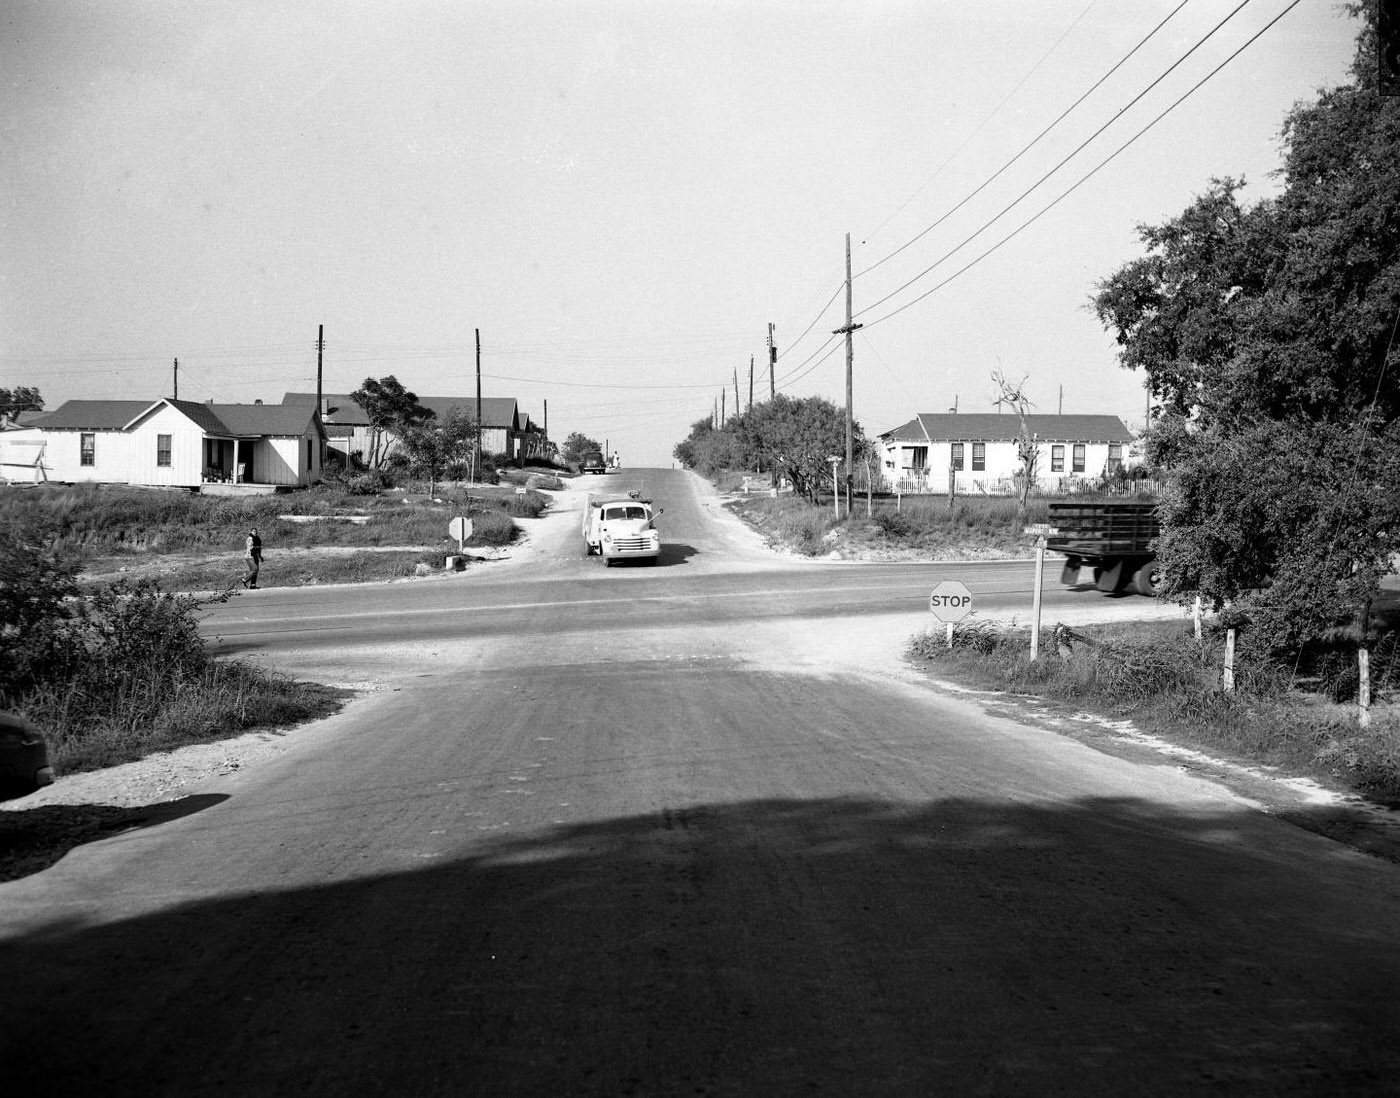 Intersection of Airport Blvd and E. 12th St, Looking West, 1951.